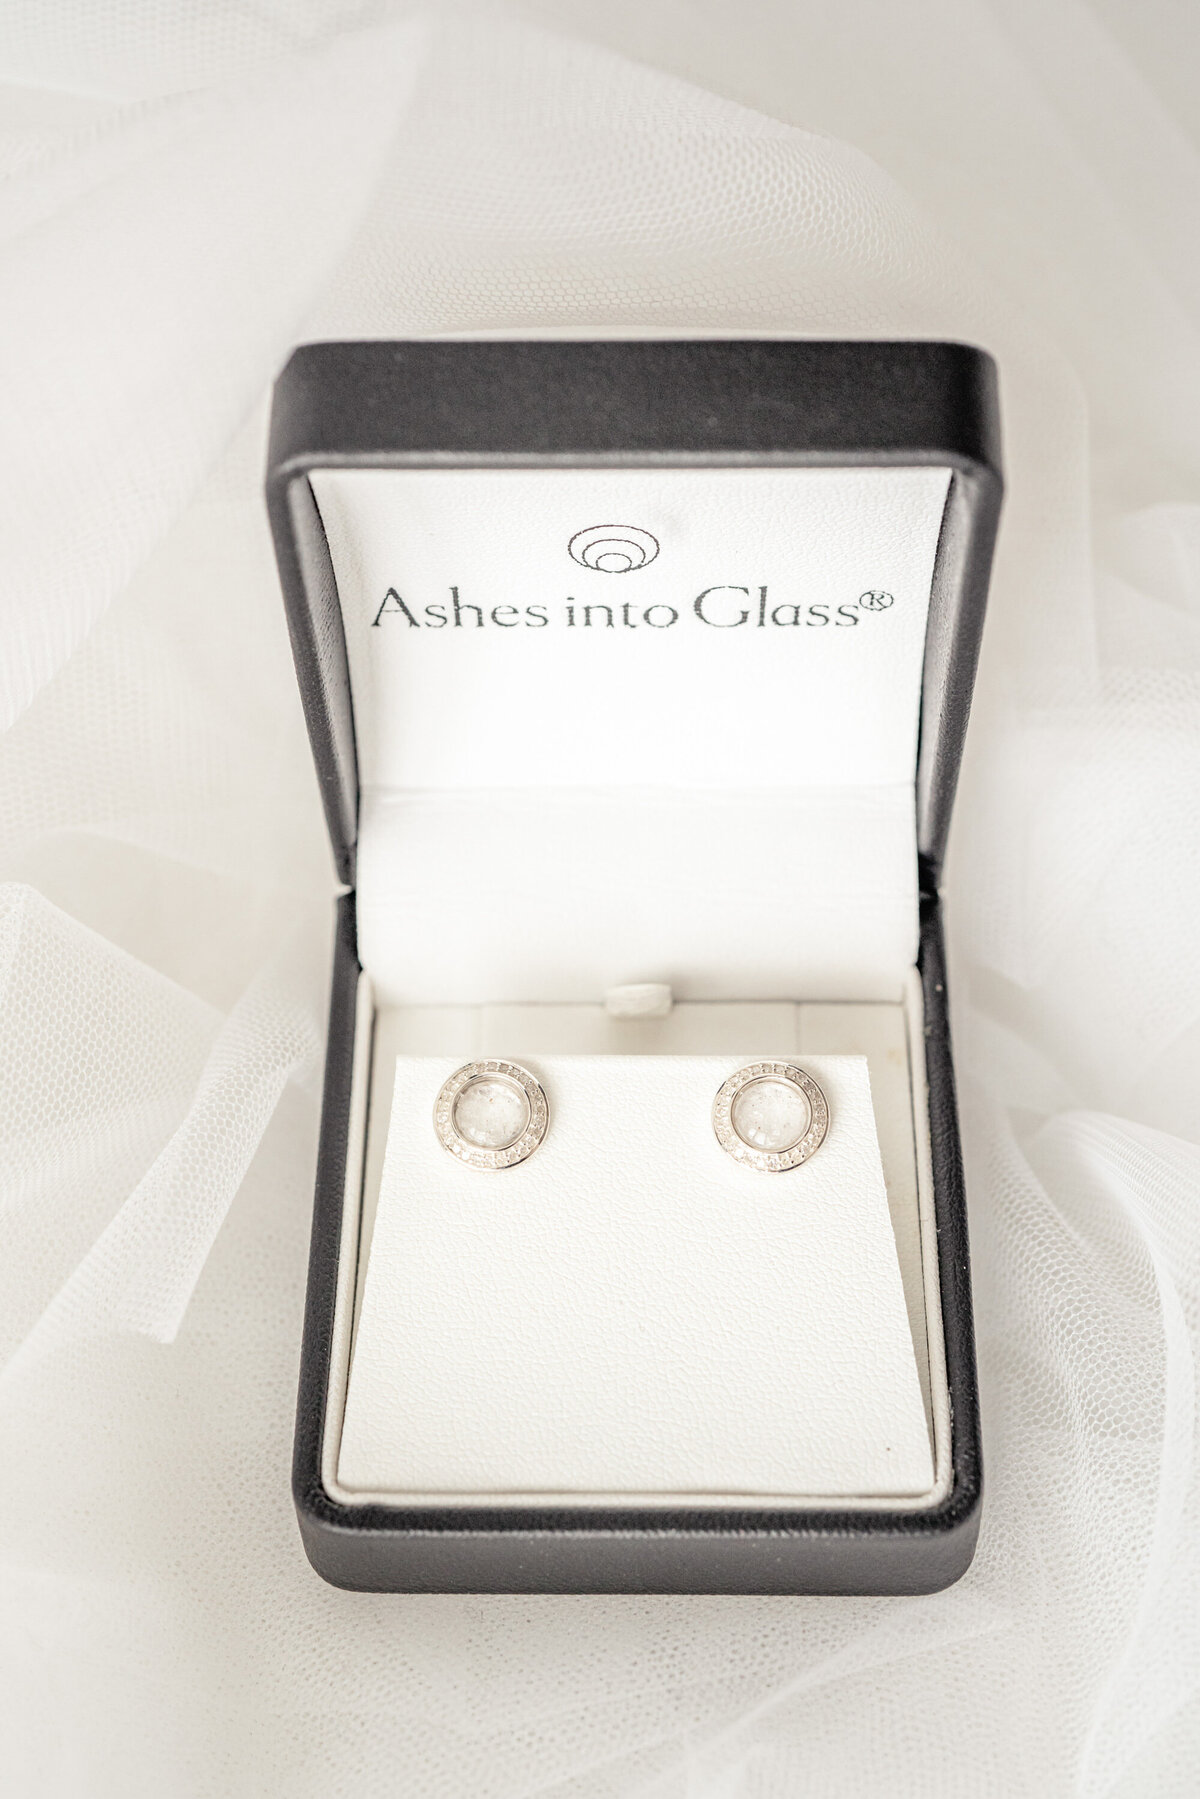 Remembering-loved-ones-at-weddings-ashesinto-glass-earrings